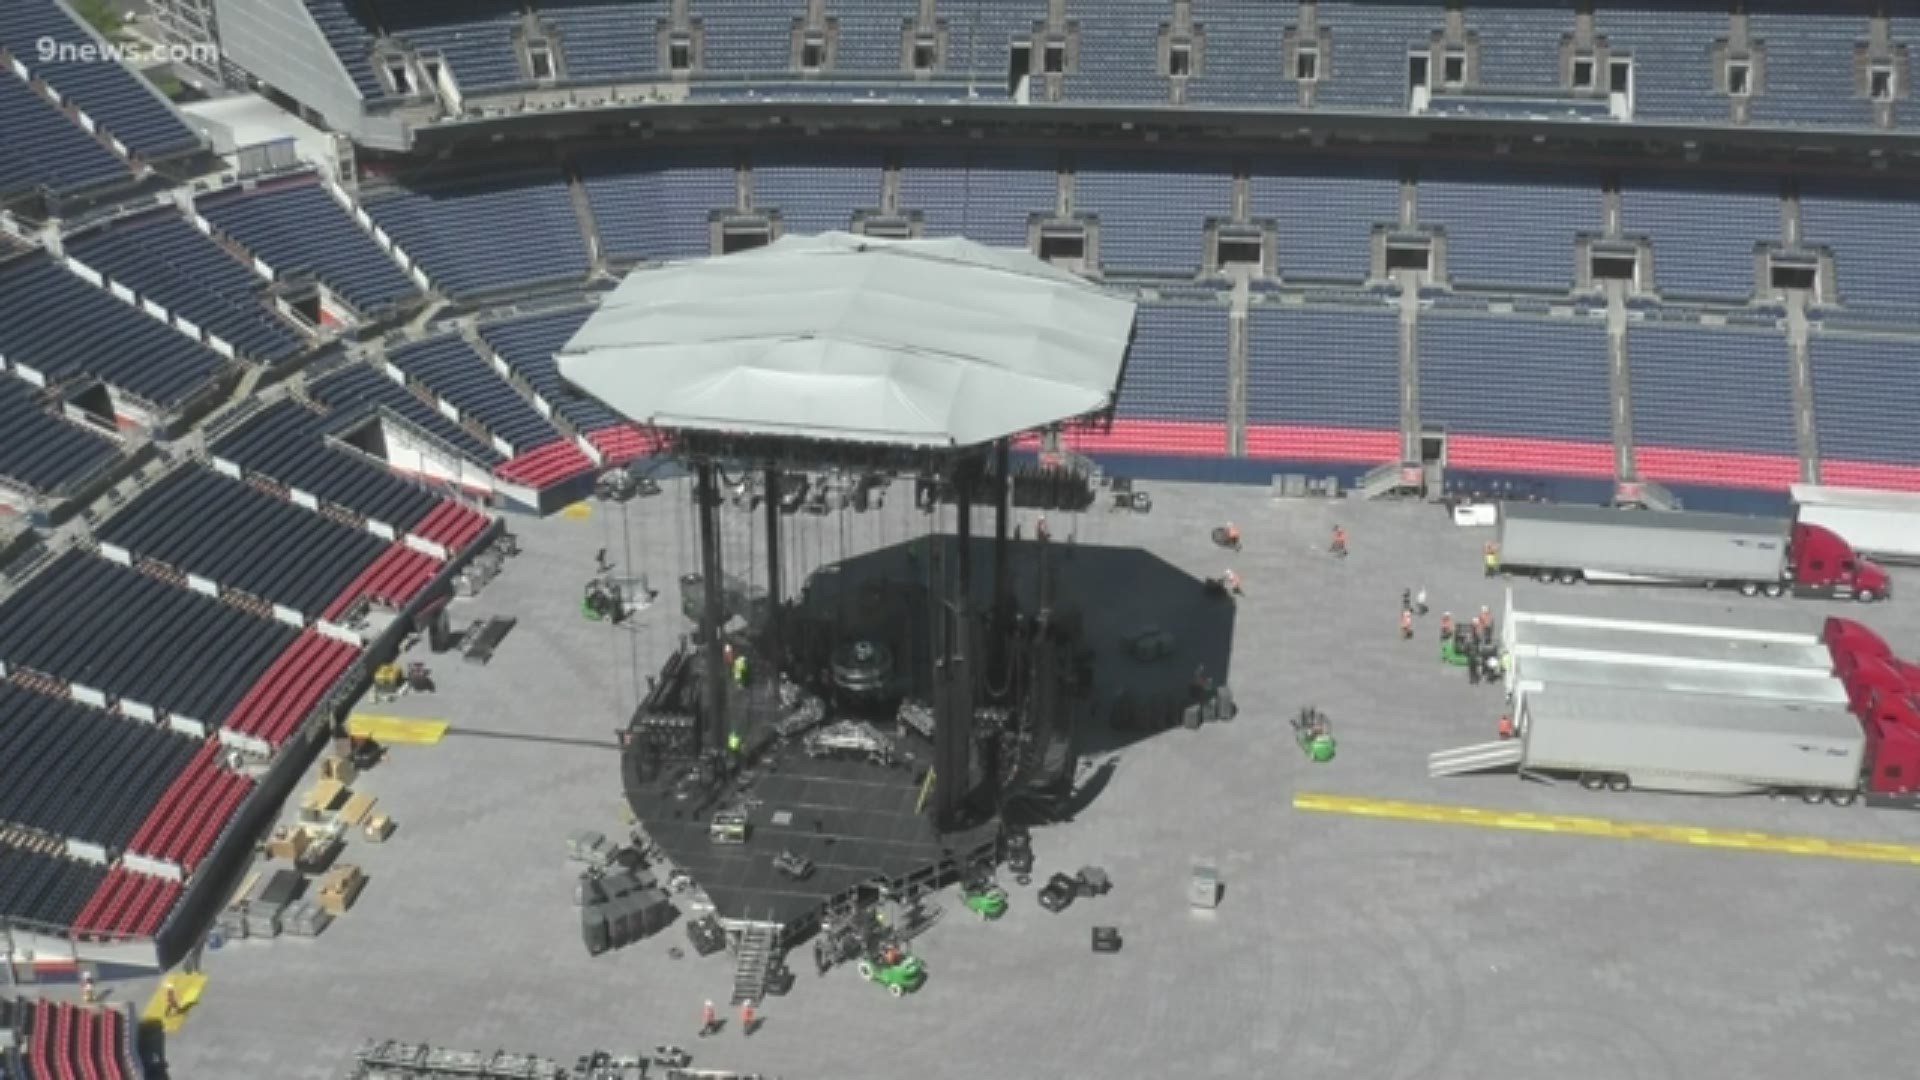 Country music icon Garth Brooks will headline a concert at Denver's Broncos Stadium at Mile High on Saturday, June 8. Here's a look at preparations on Thursday, June 6, 2019.